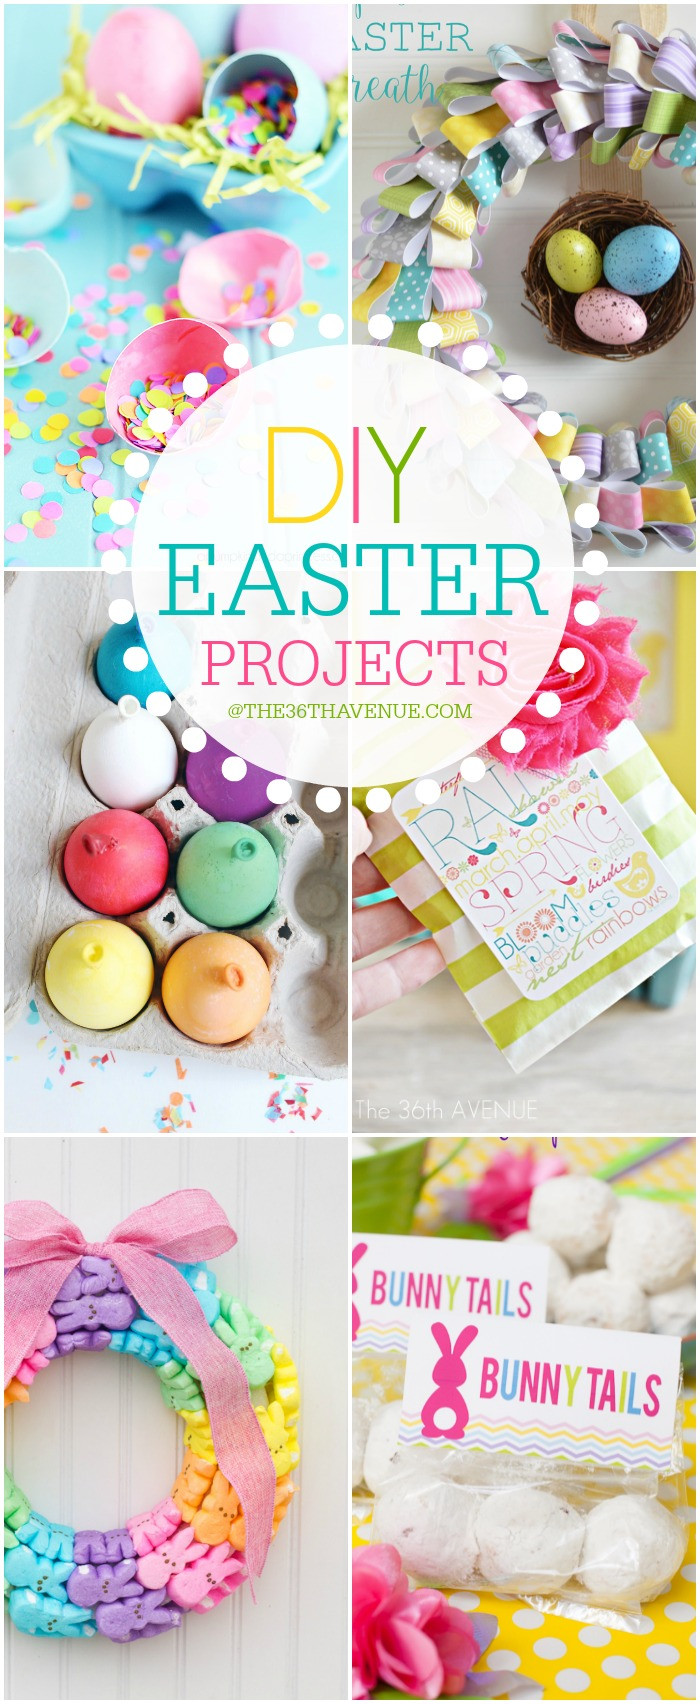 Crafts For Easter
 The 36th AVENUE Easter Crafts and DIY Decor Ideas